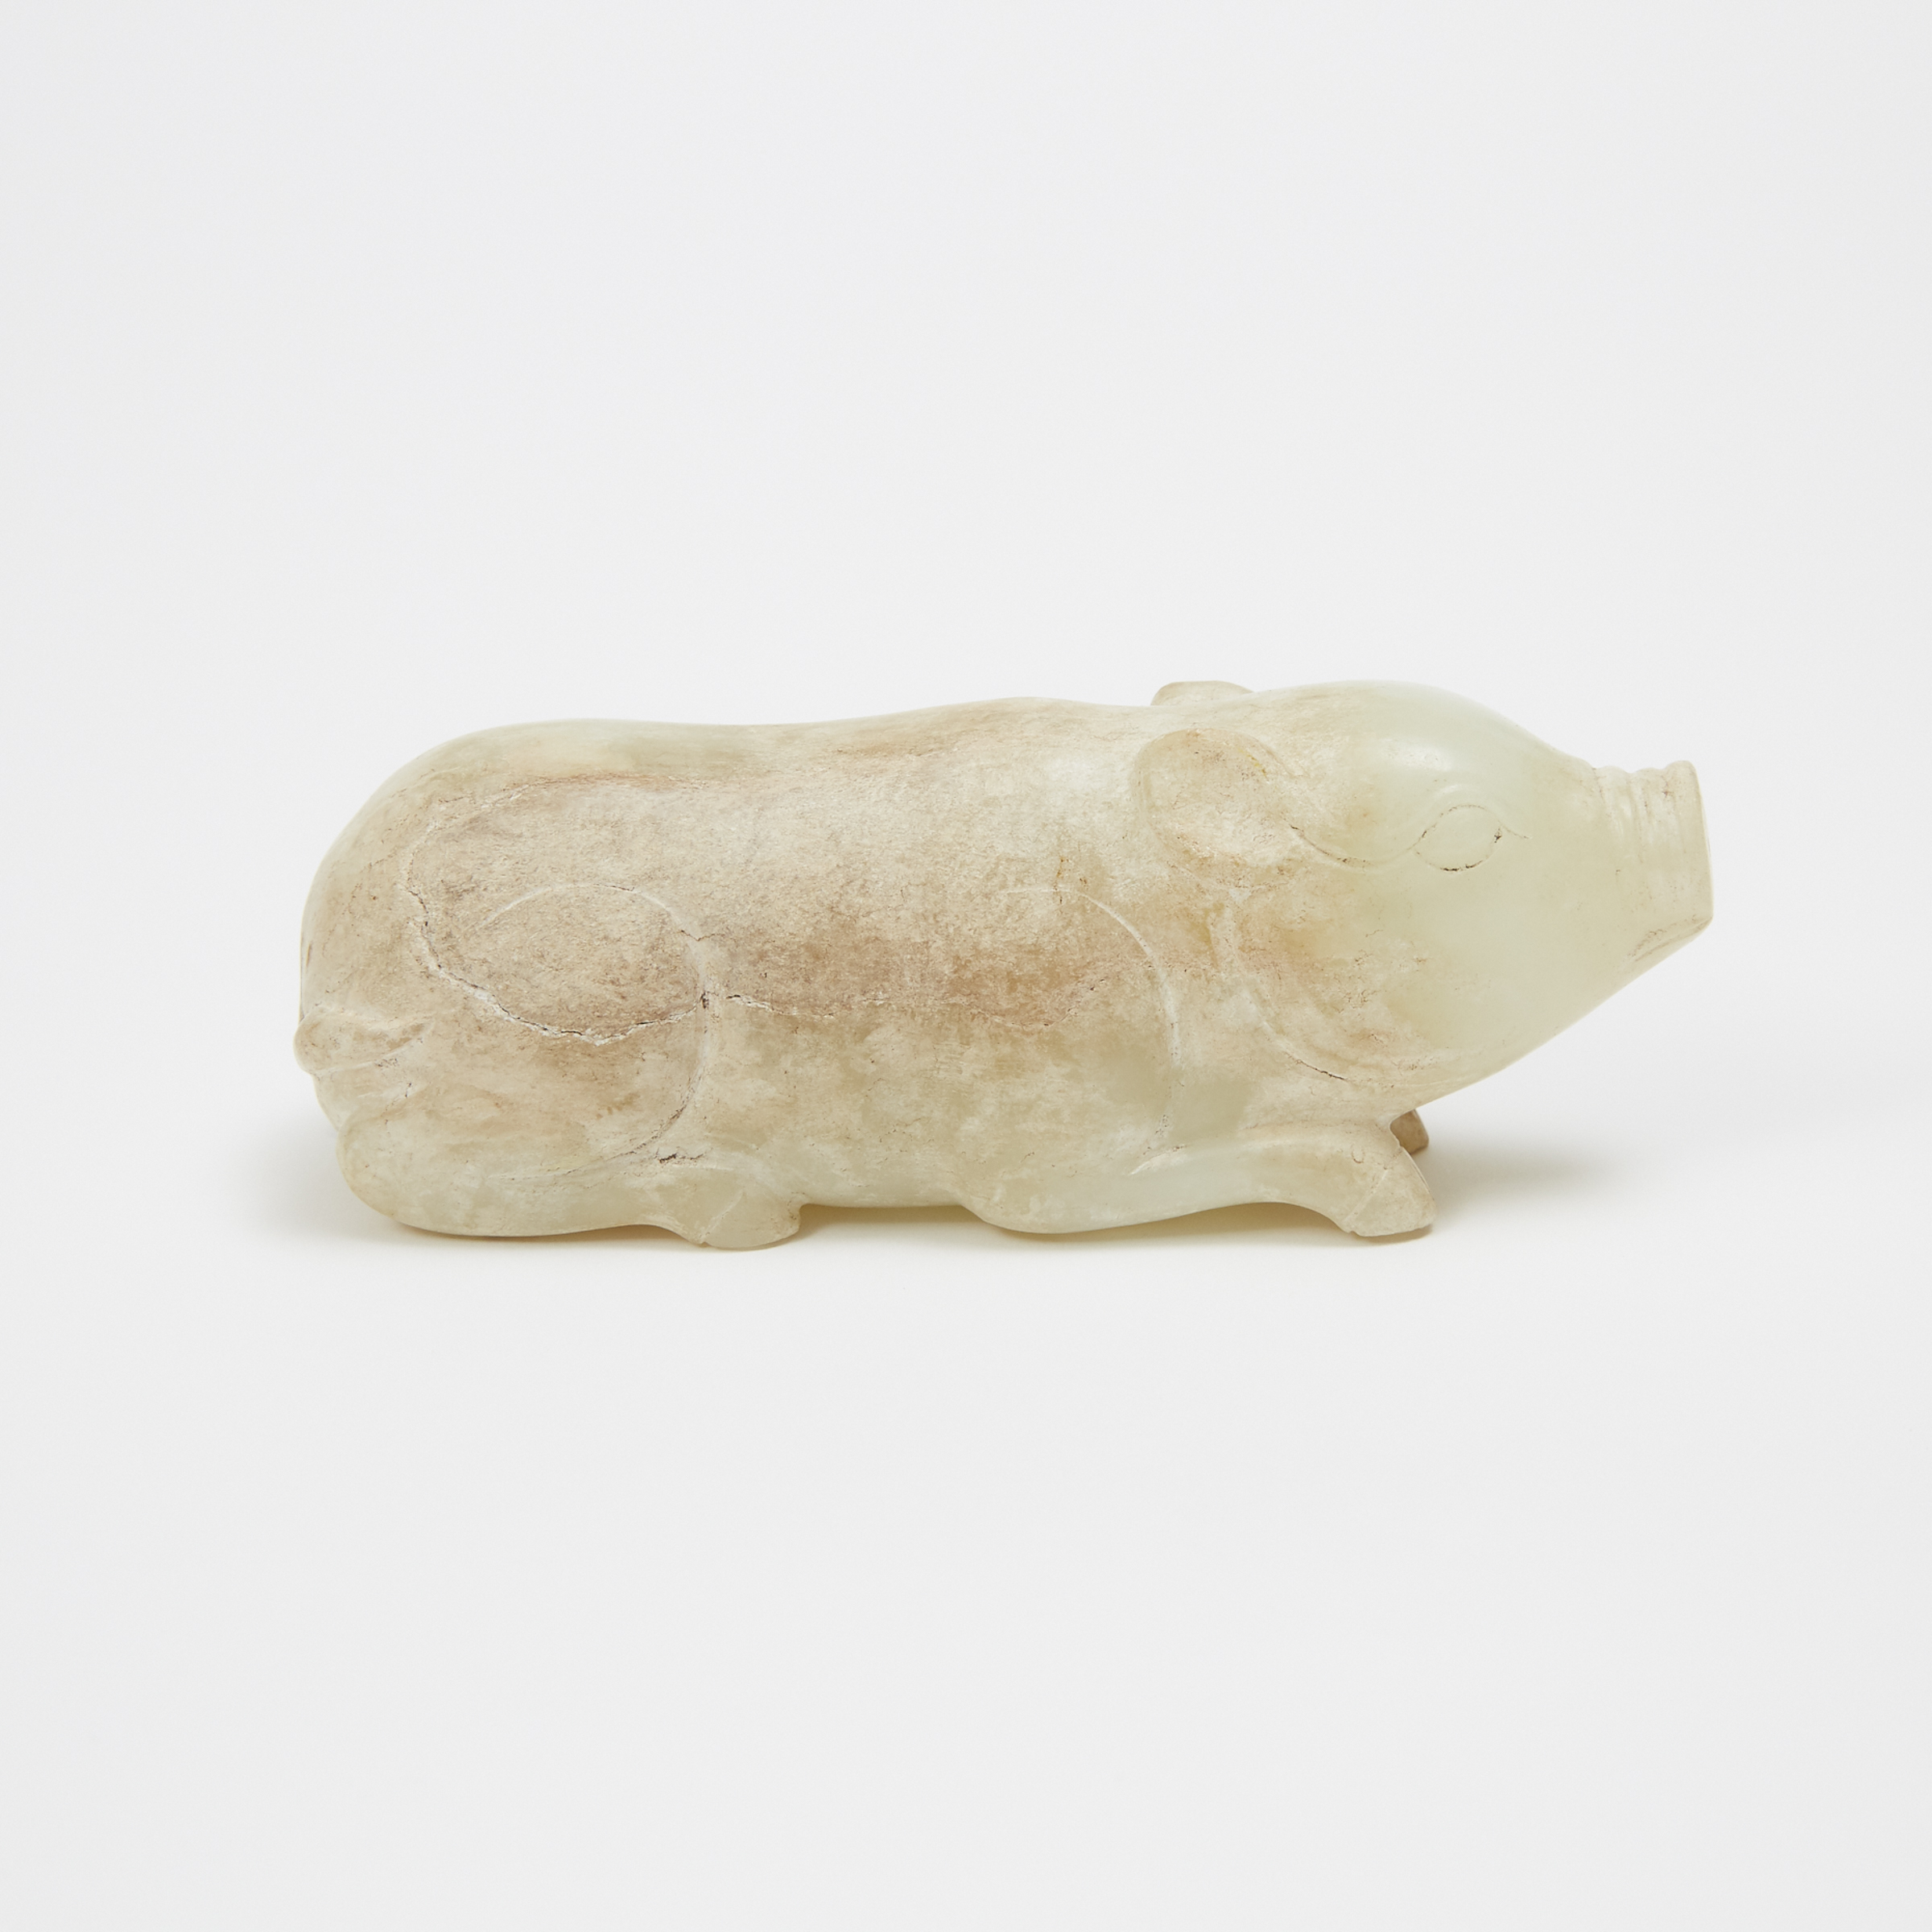 A White and Russet Jade Carving of a Pig